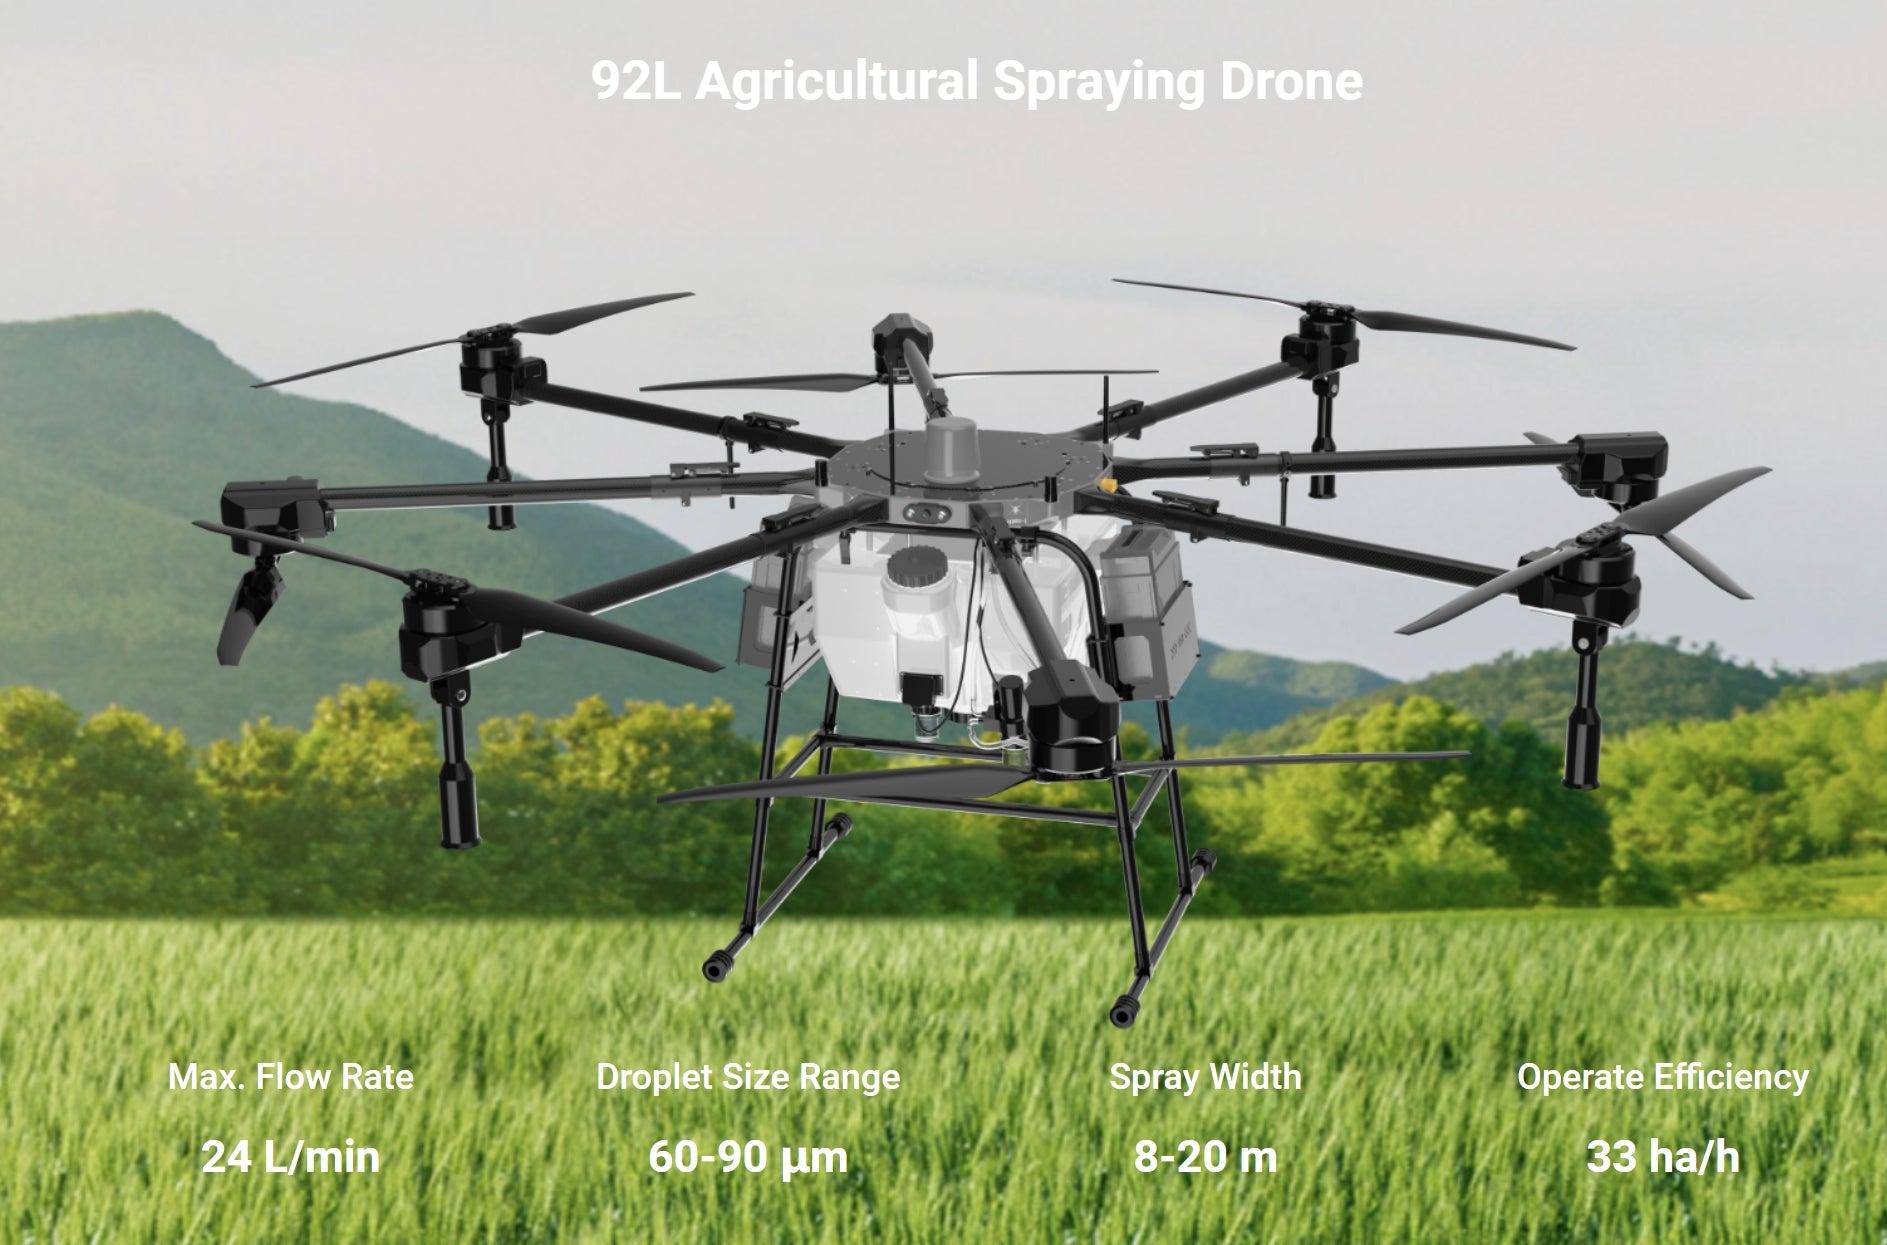 H200 Agricultural / Transport Drone, 92L Agricultural Spraying Drone Max. Flow Rate Droplet Size Range Spray